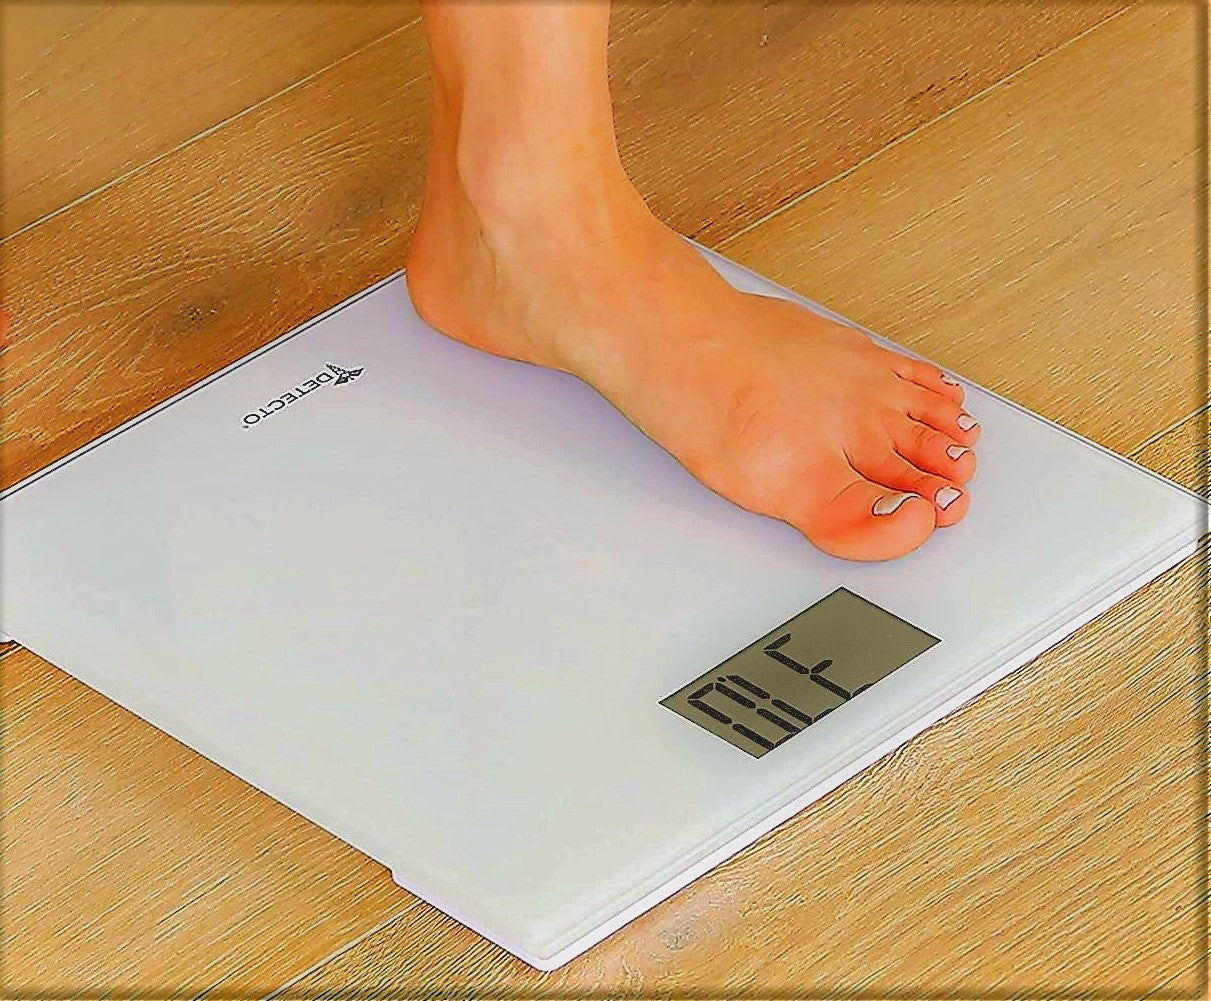 Detecto D107 Low Profile Body Weight Bathroom Scale,